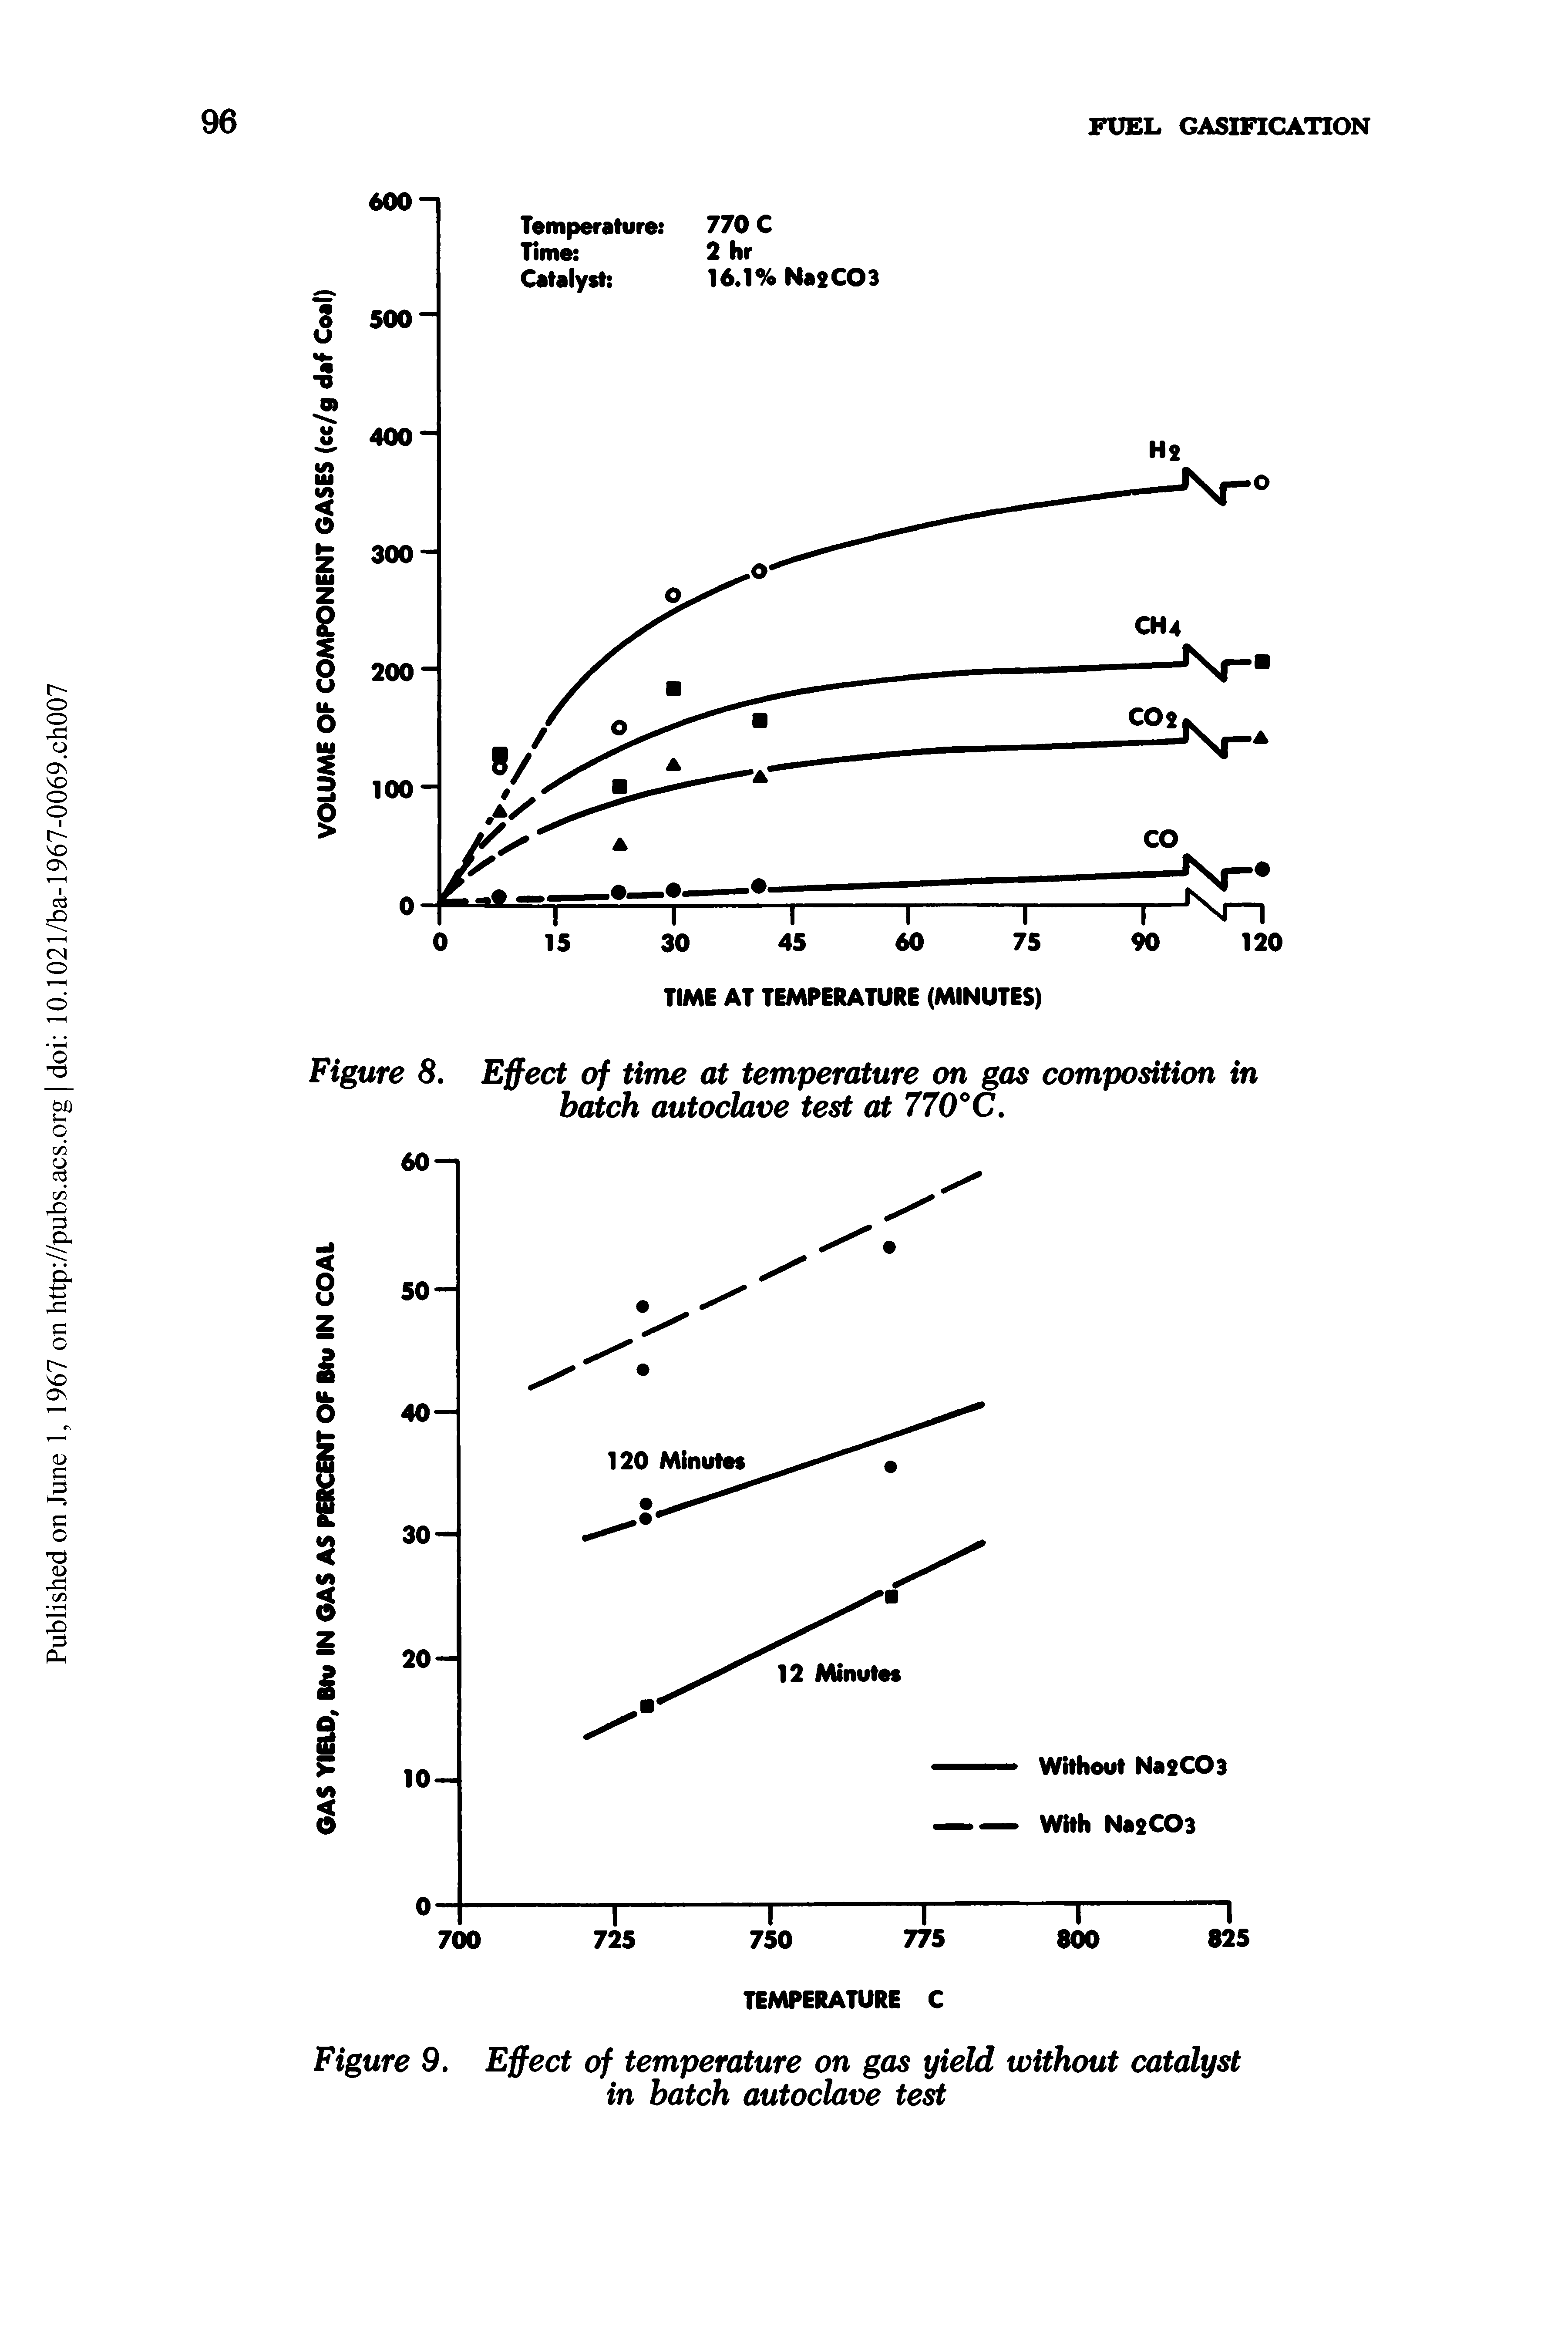 Figure 8. Effect of time at temperature on gas composition in batch autoclave test at 770°C.